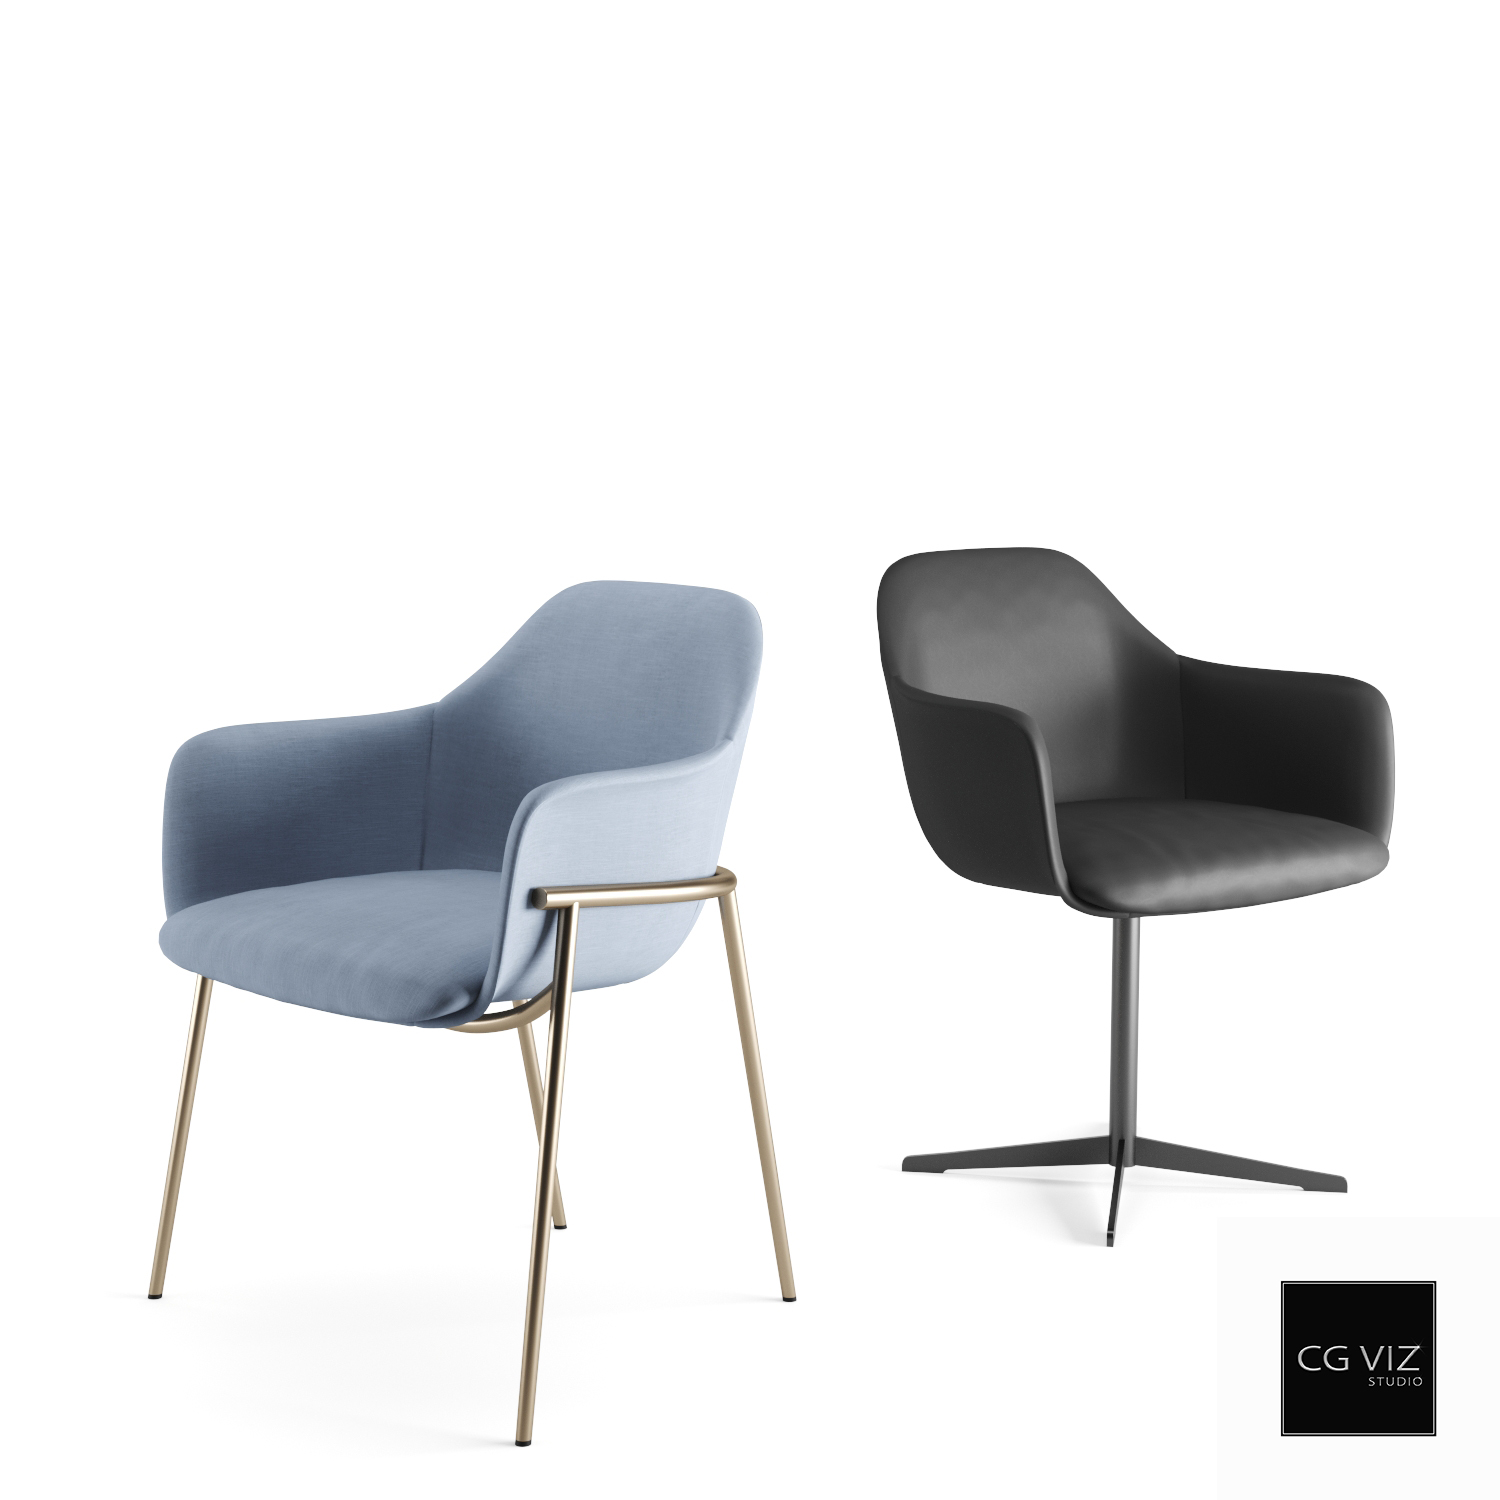 Rendered Preview of Marelli Living-Chia Chairs 3D Model by CG Viz Studio